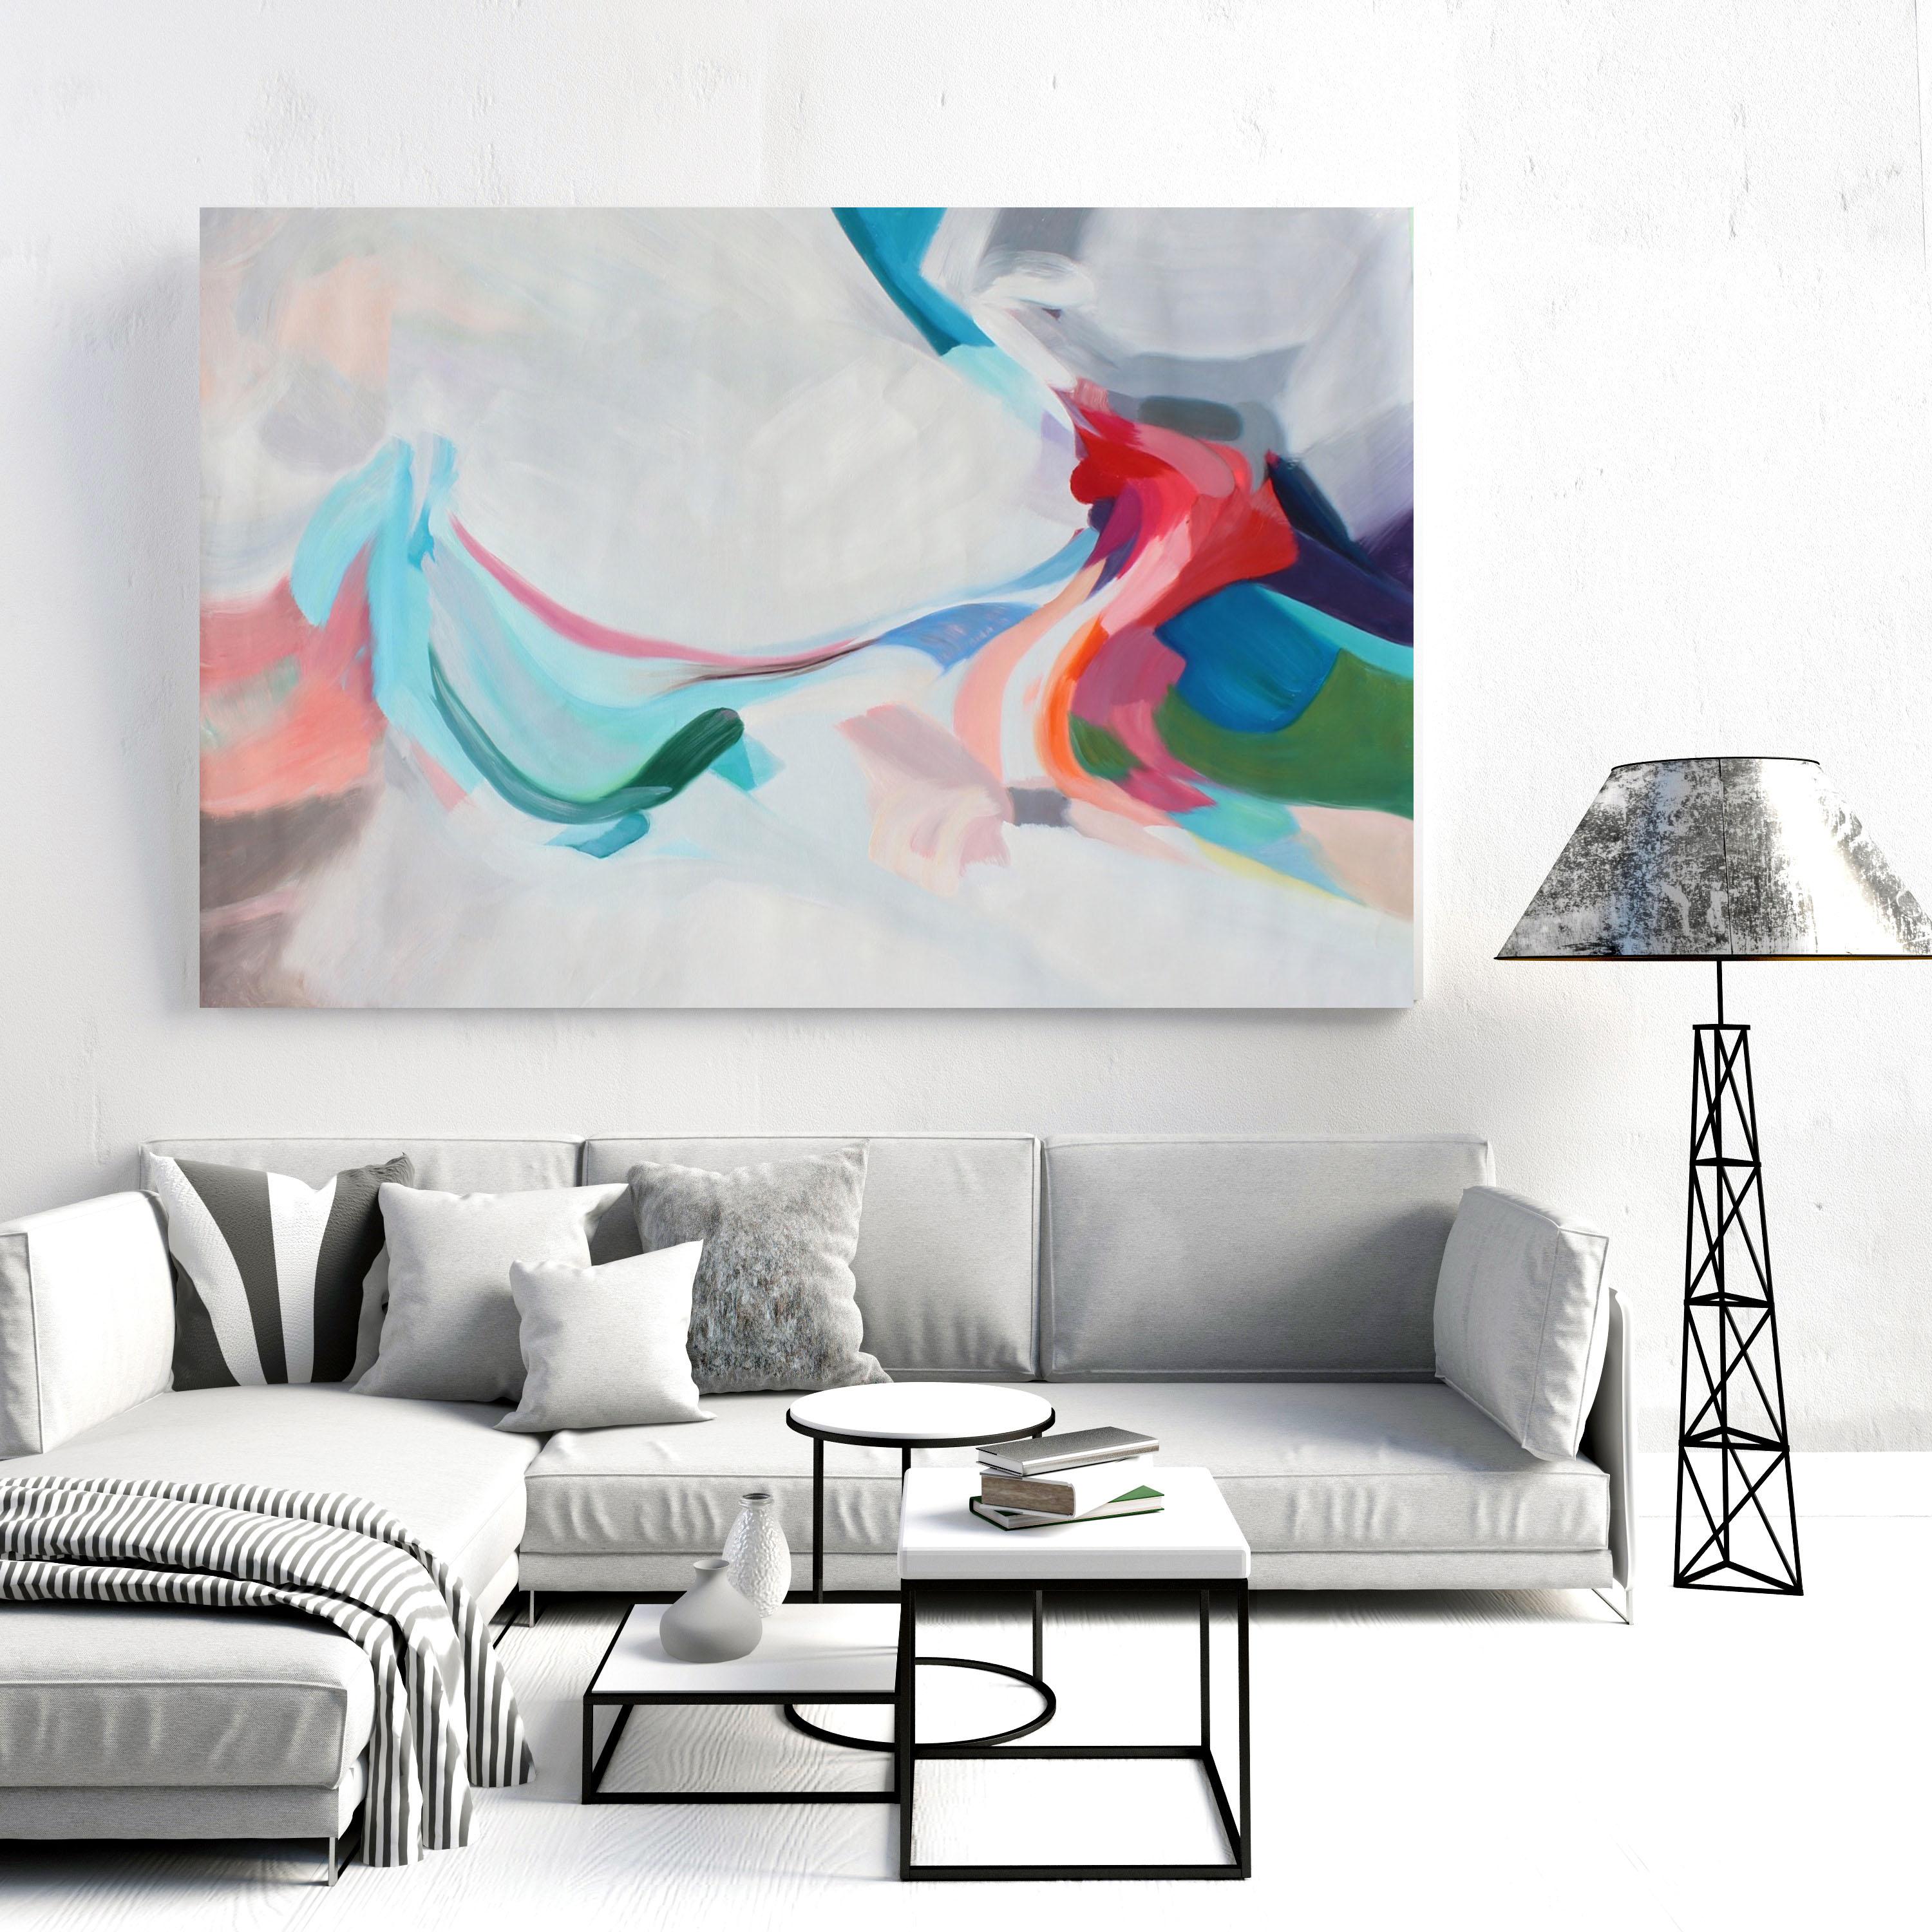 Irena Orlov Interior Painting - Red Blue Contemporary Acrylic Painting on Canvas 68" X 42", Moments of Reality